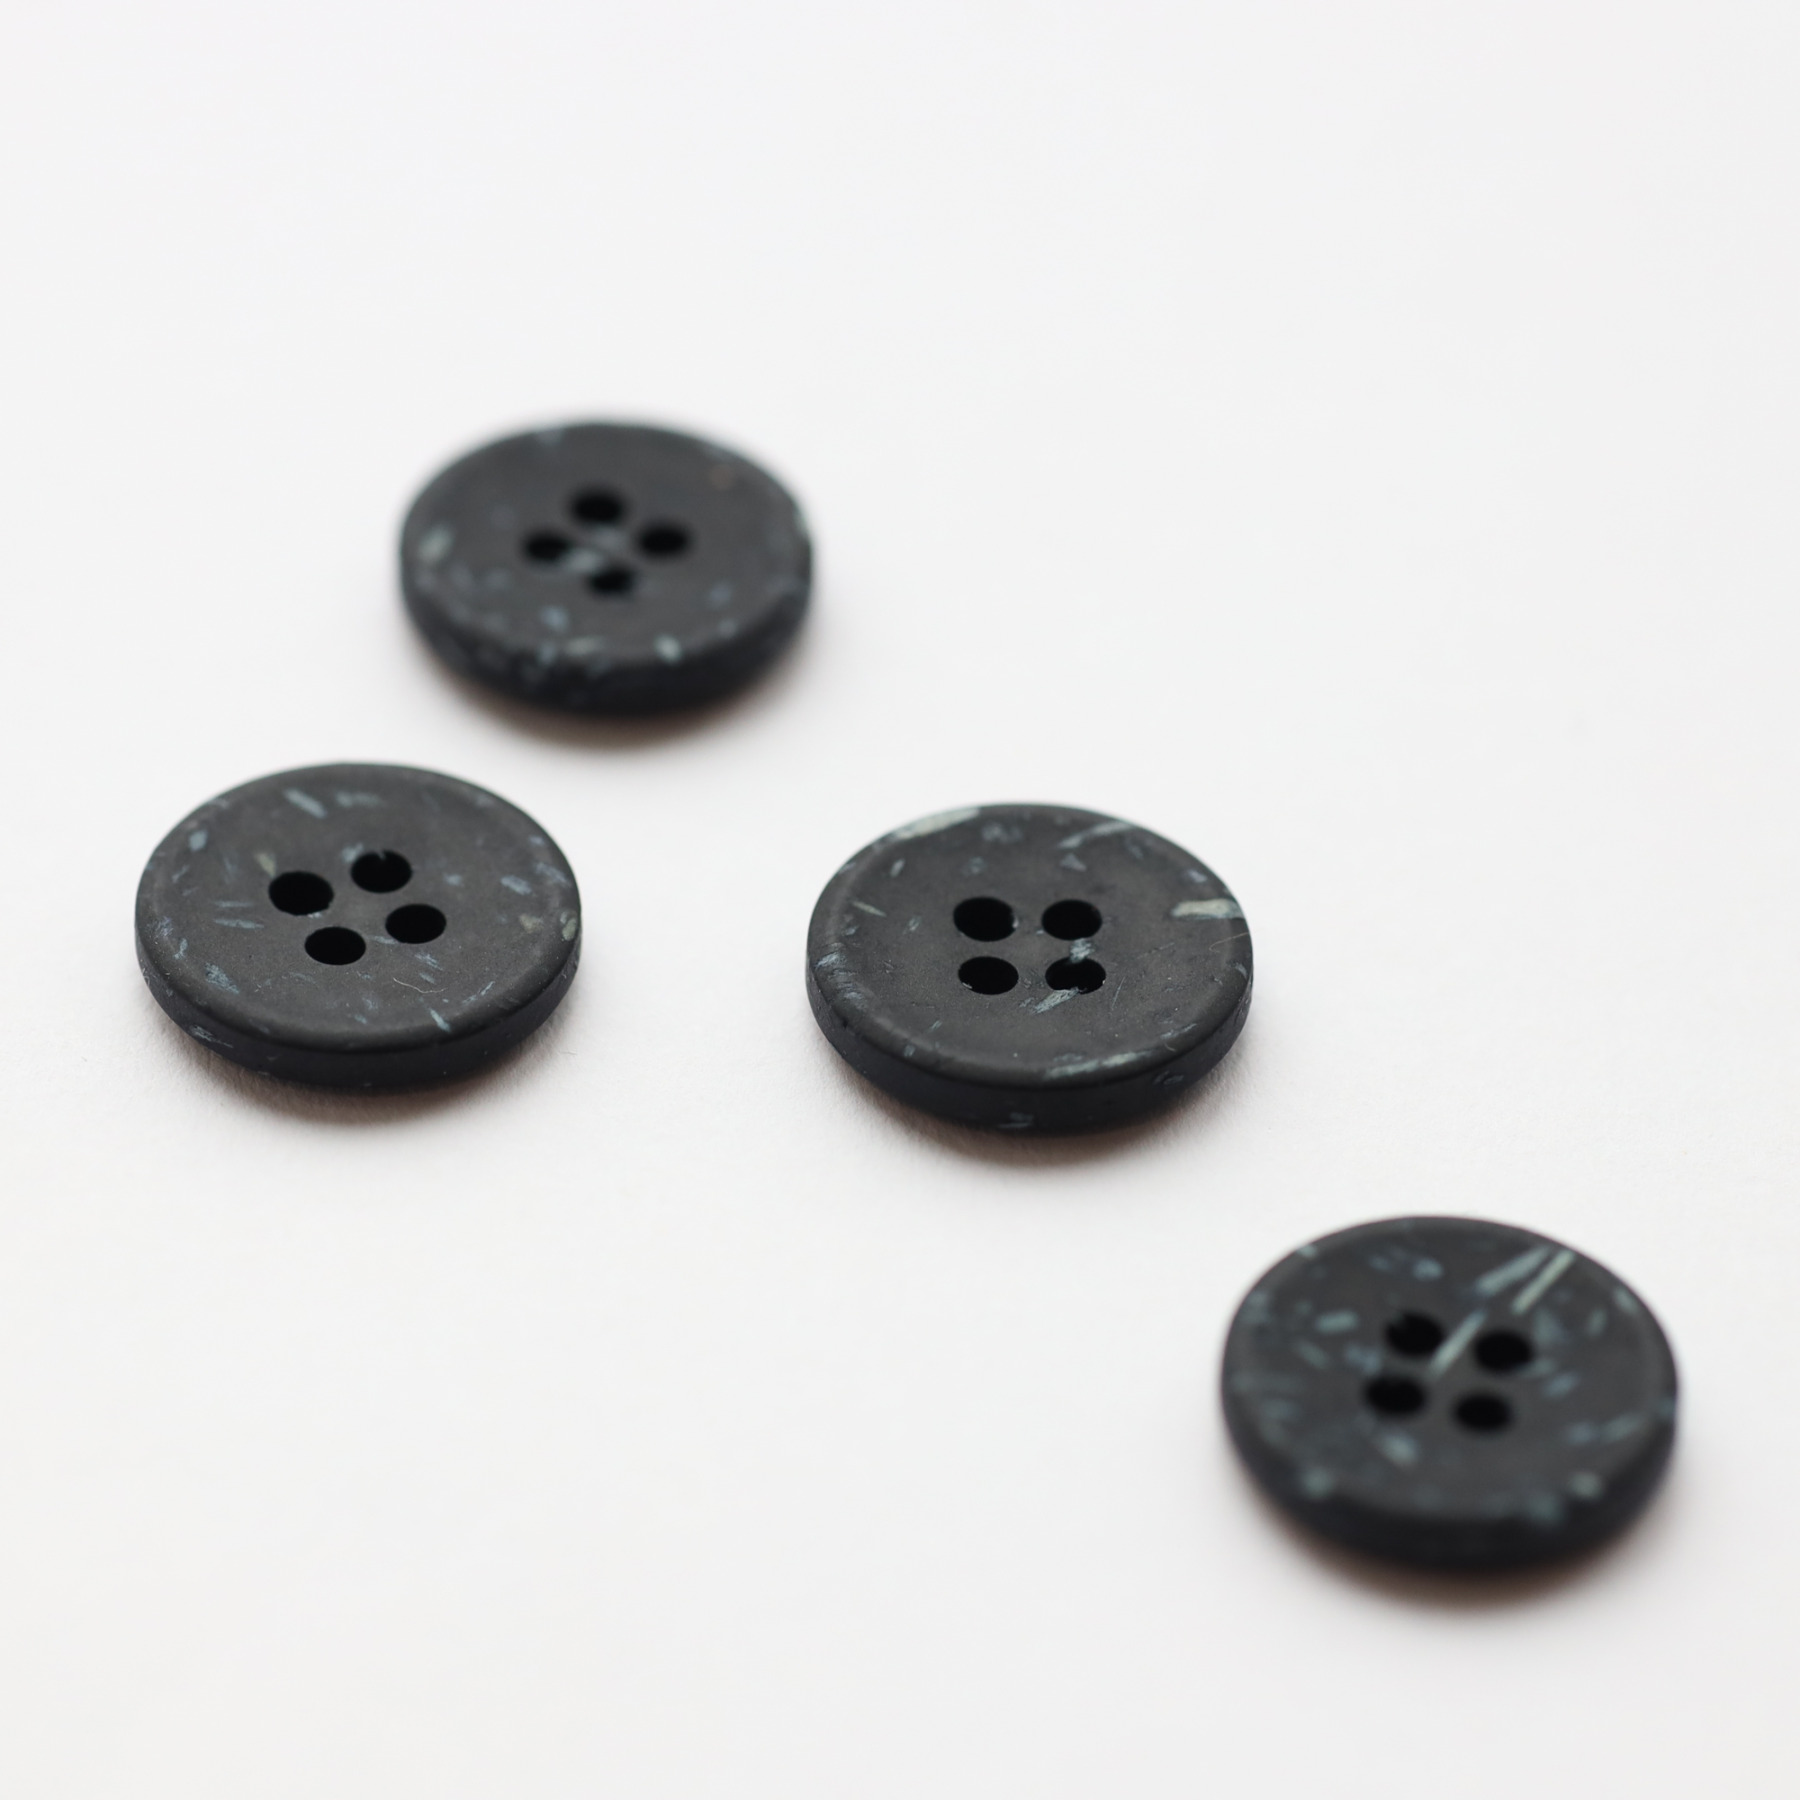 Inky Speckles 18mm Button